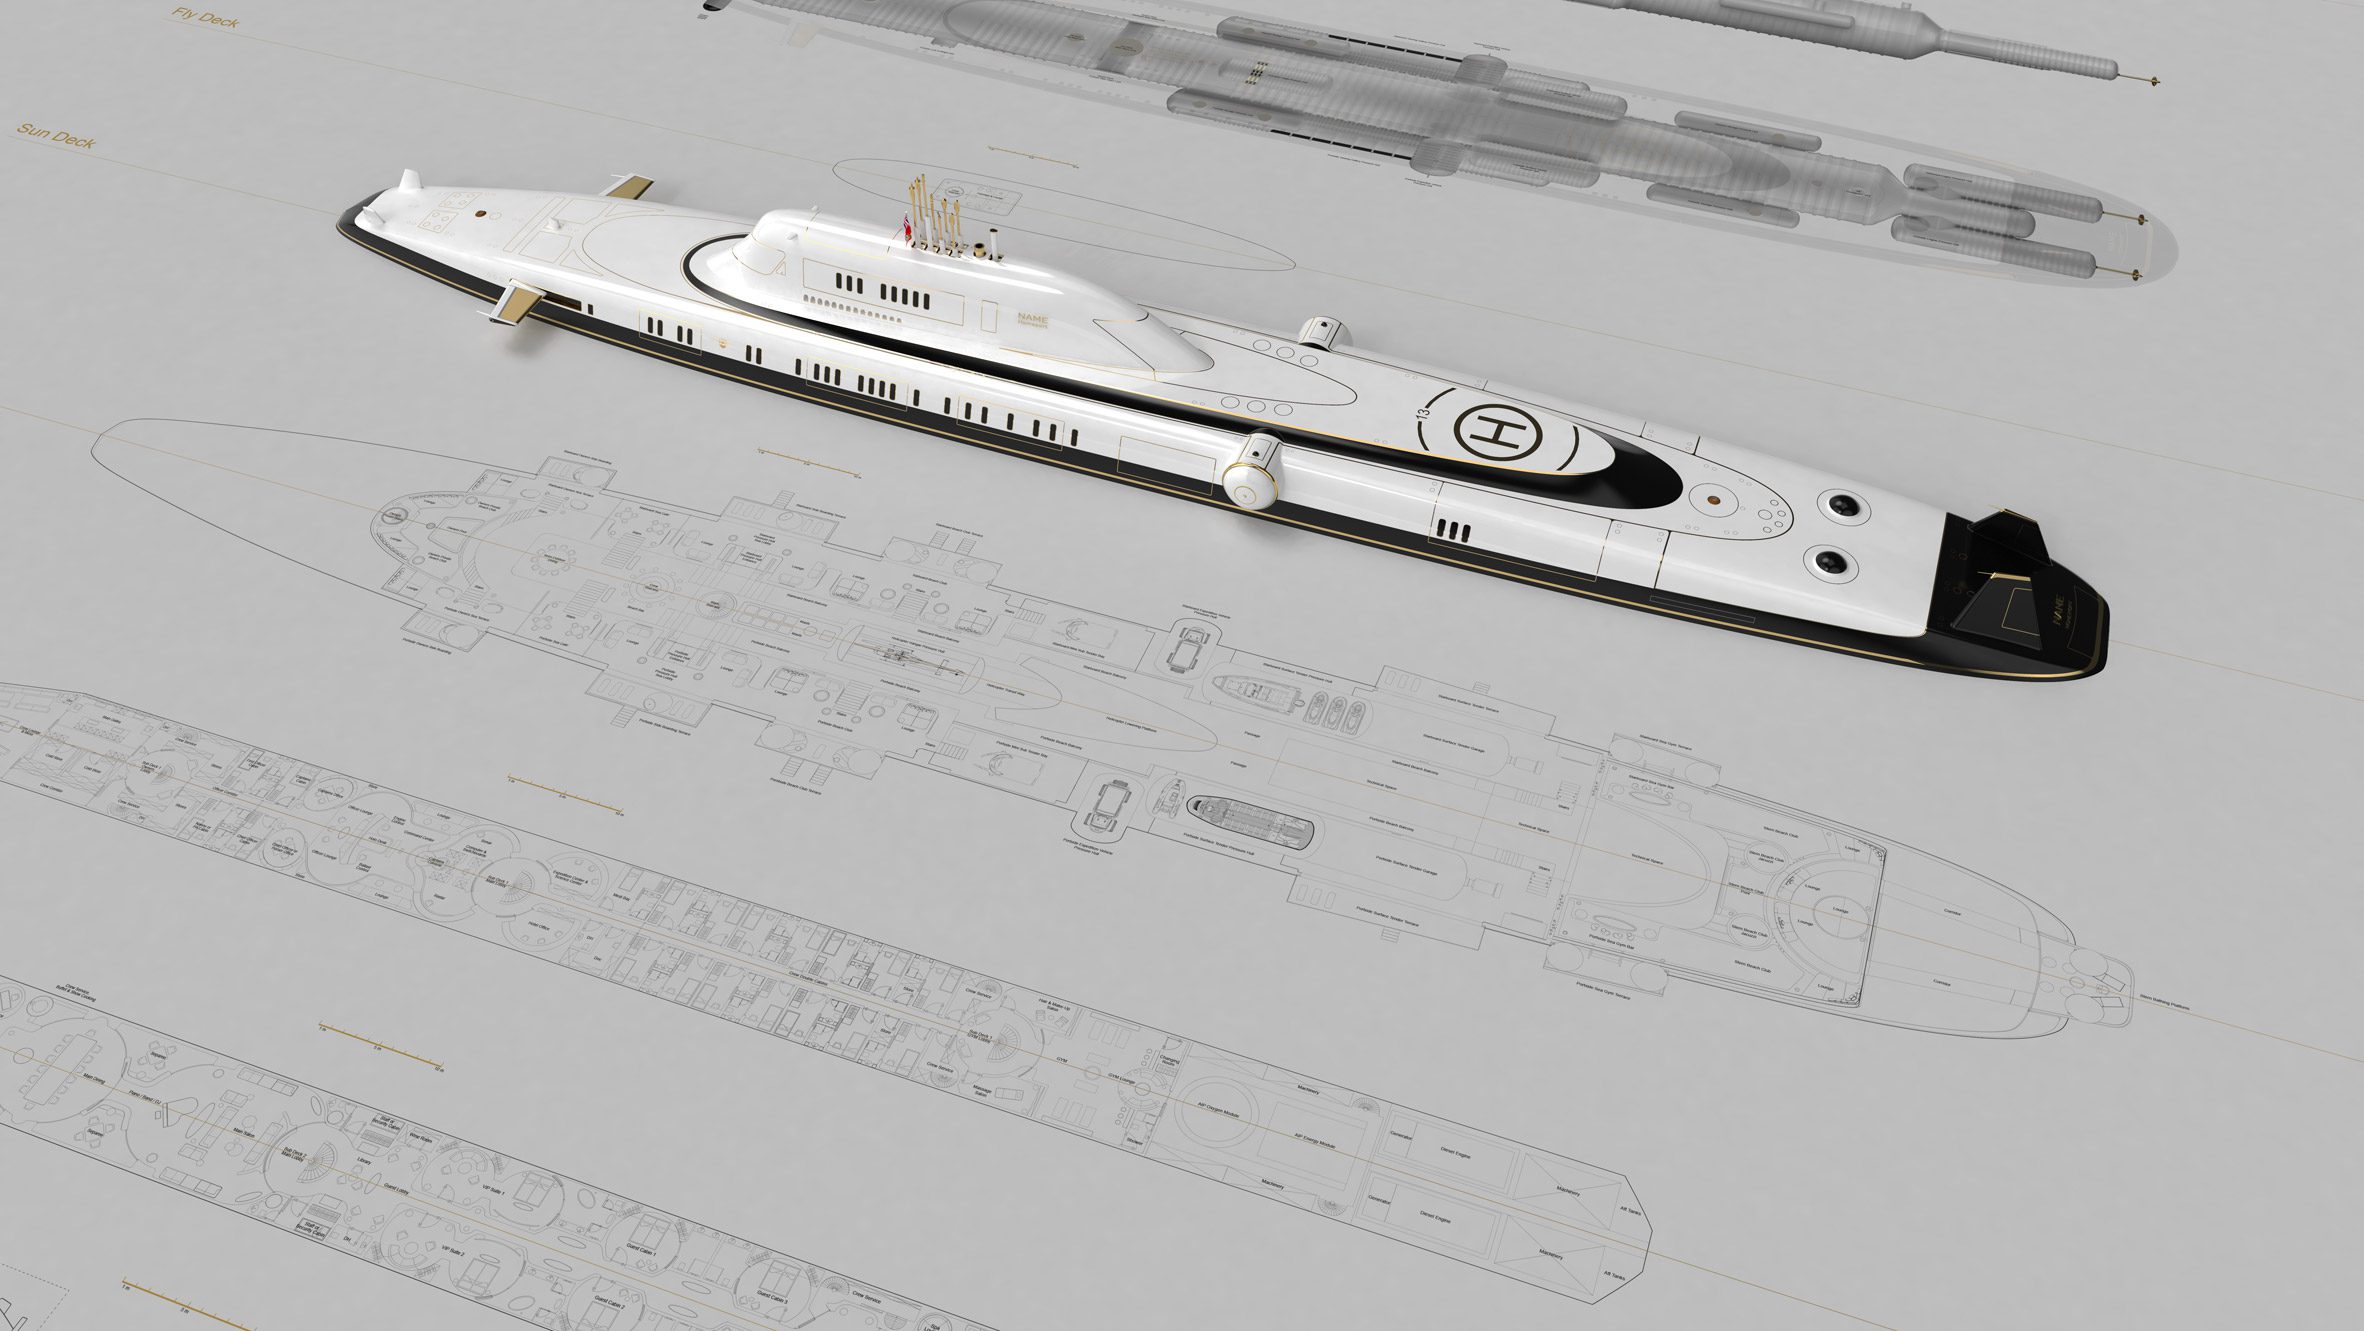 Render of M5 submersible superyacht next to sketches of the ship